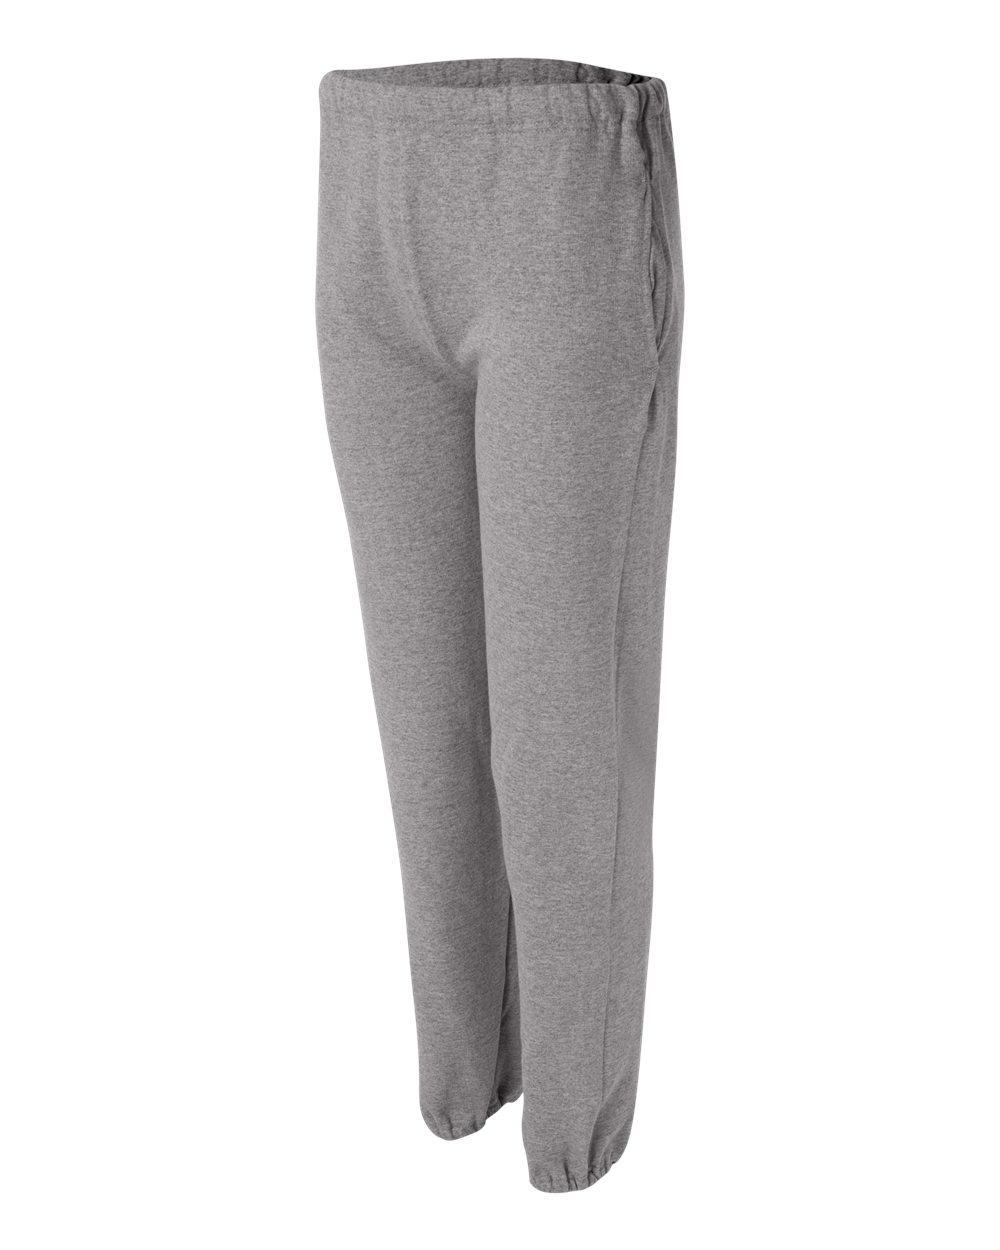 JERZEES 4950BR - Youth Sweatpant With Pockets